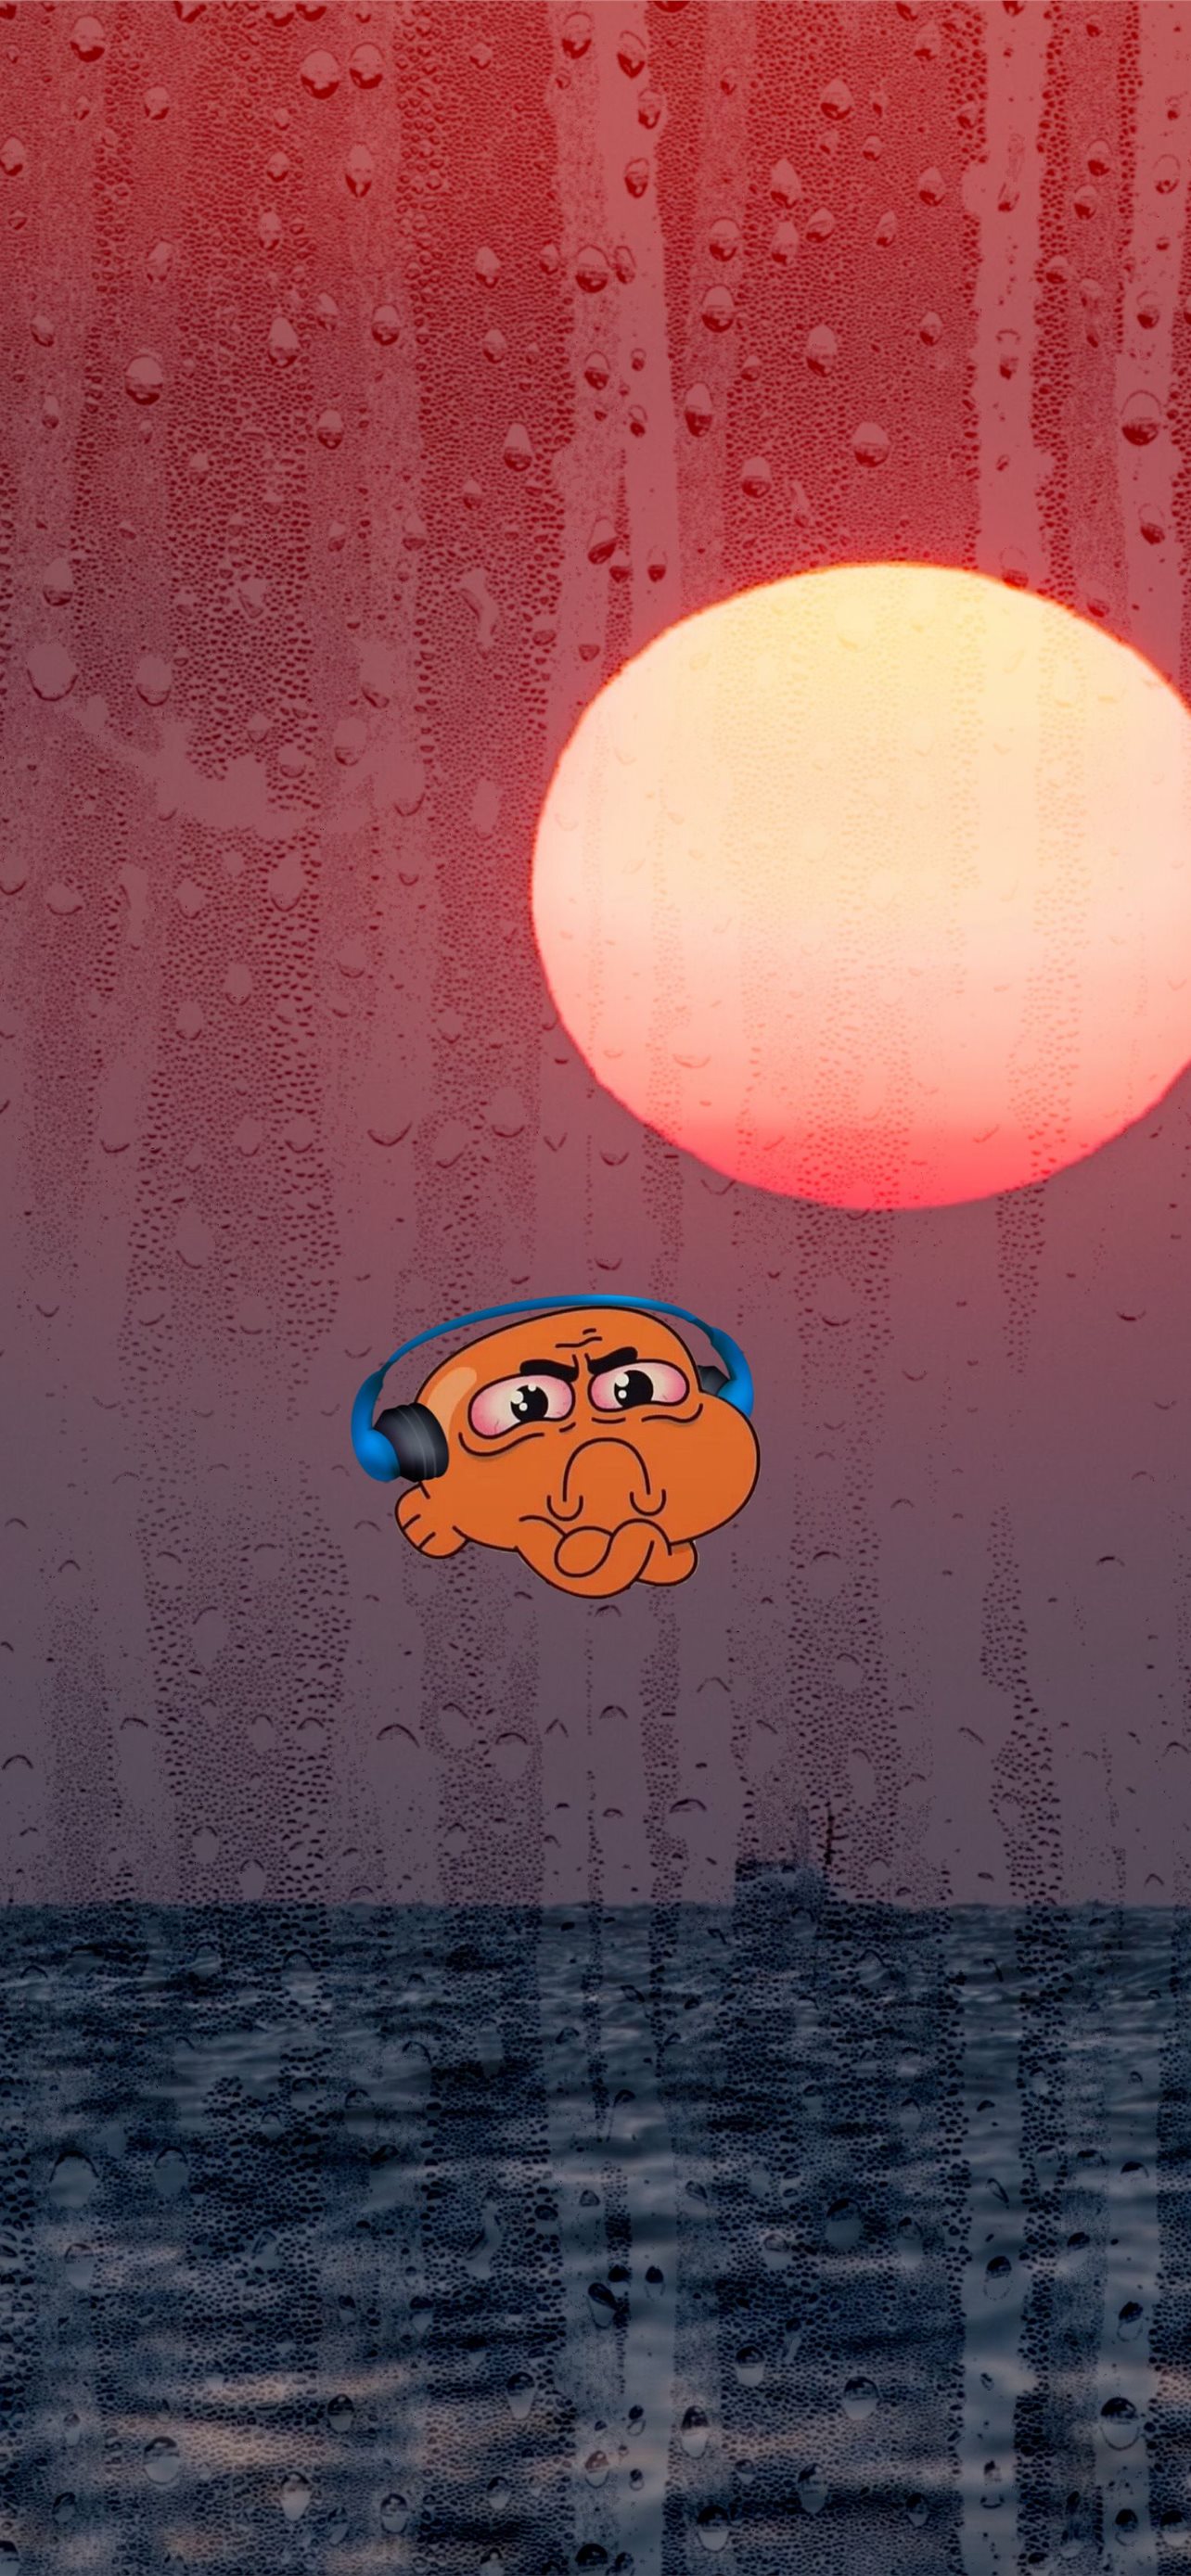 The Amazing World of Gumball Wallpapers | Cute cartoon wallpapers, Cartoon  wallpaper iphone, Cute wallpapers